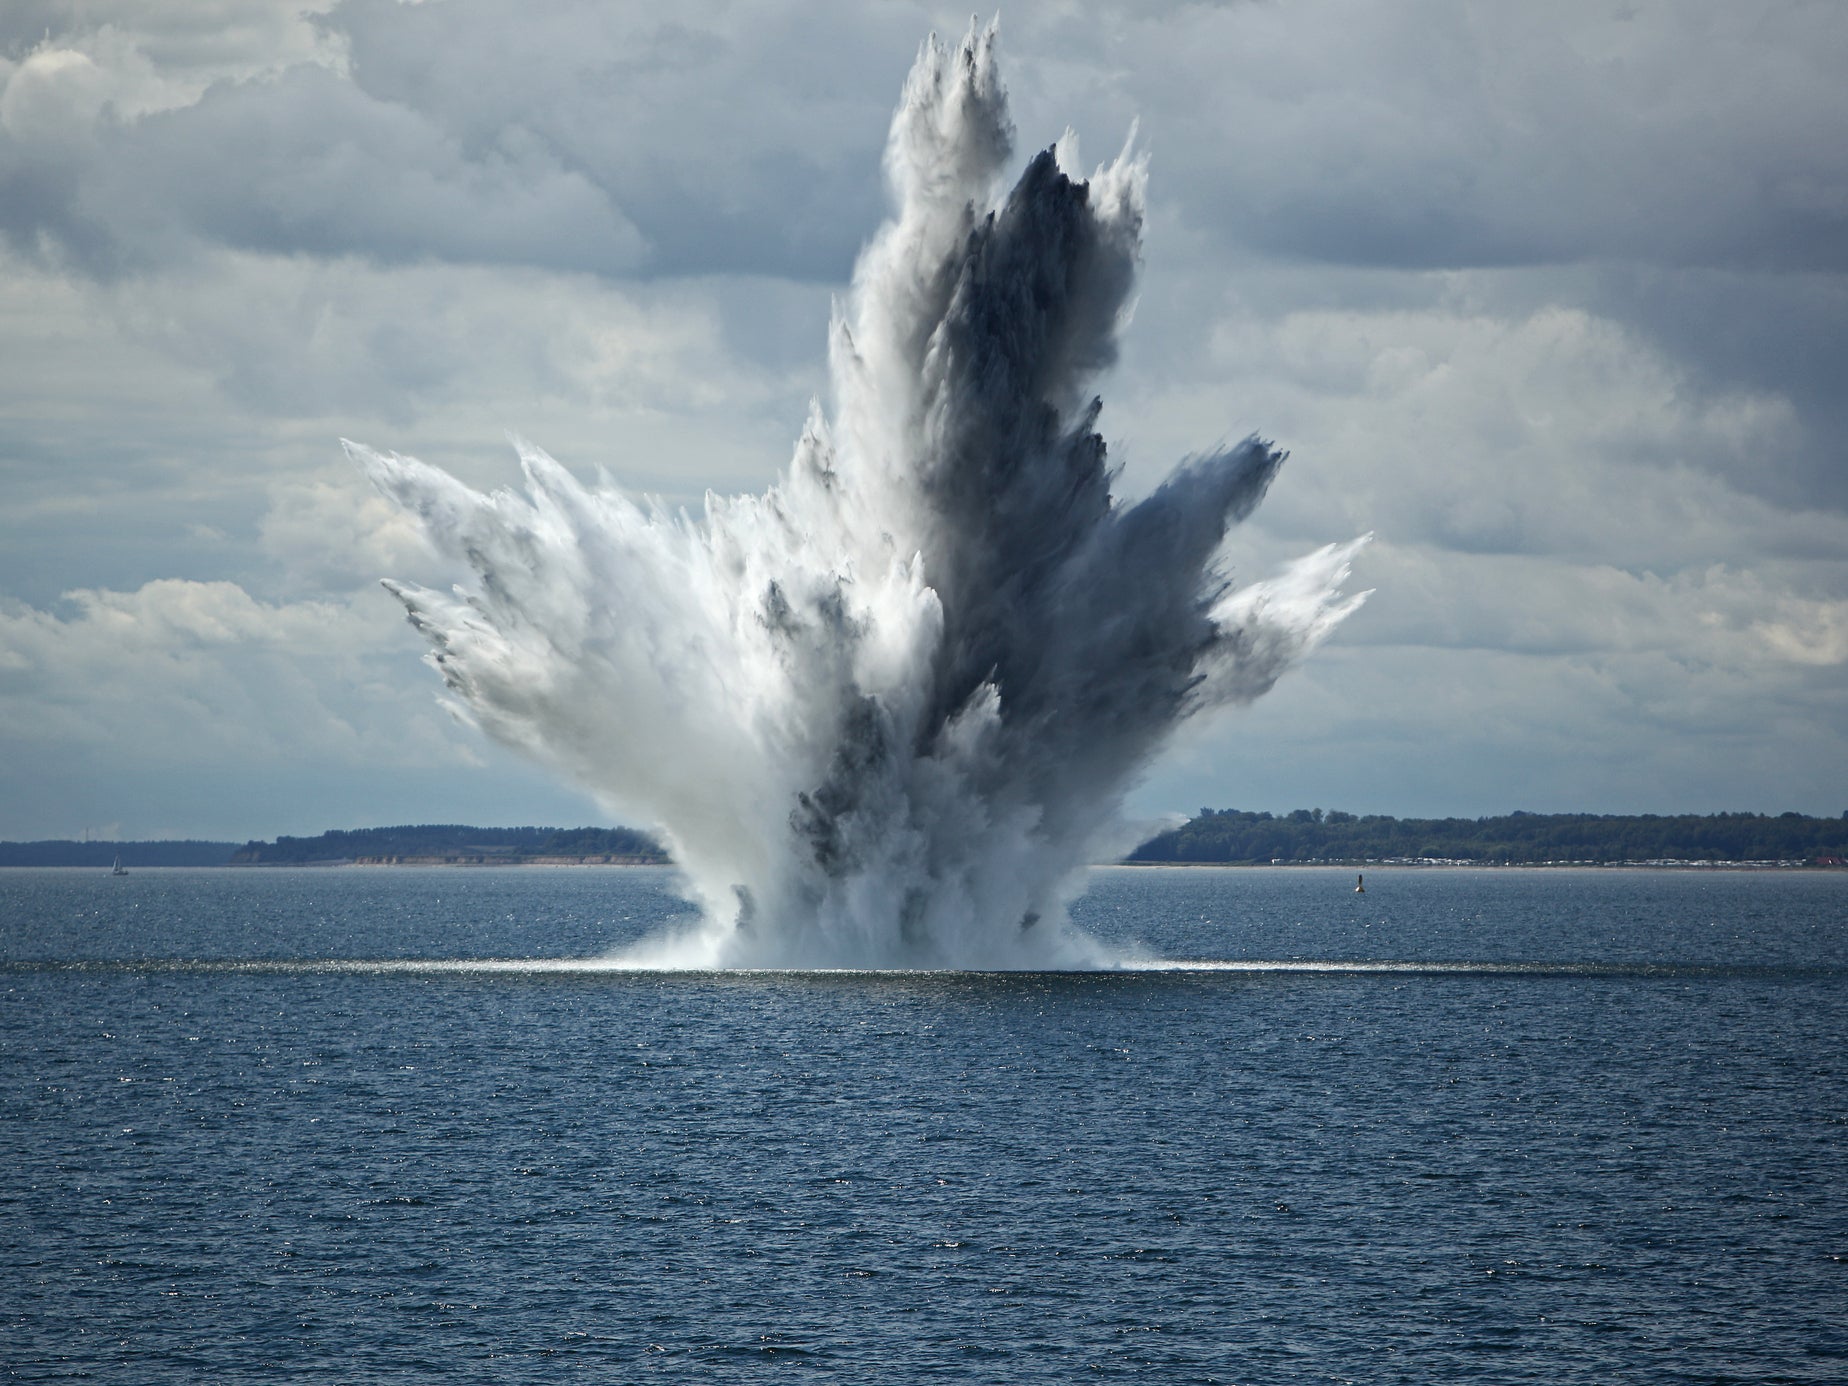 The Royal Navy regularly detonates unexploded World War Two bombs lying on the sea floor